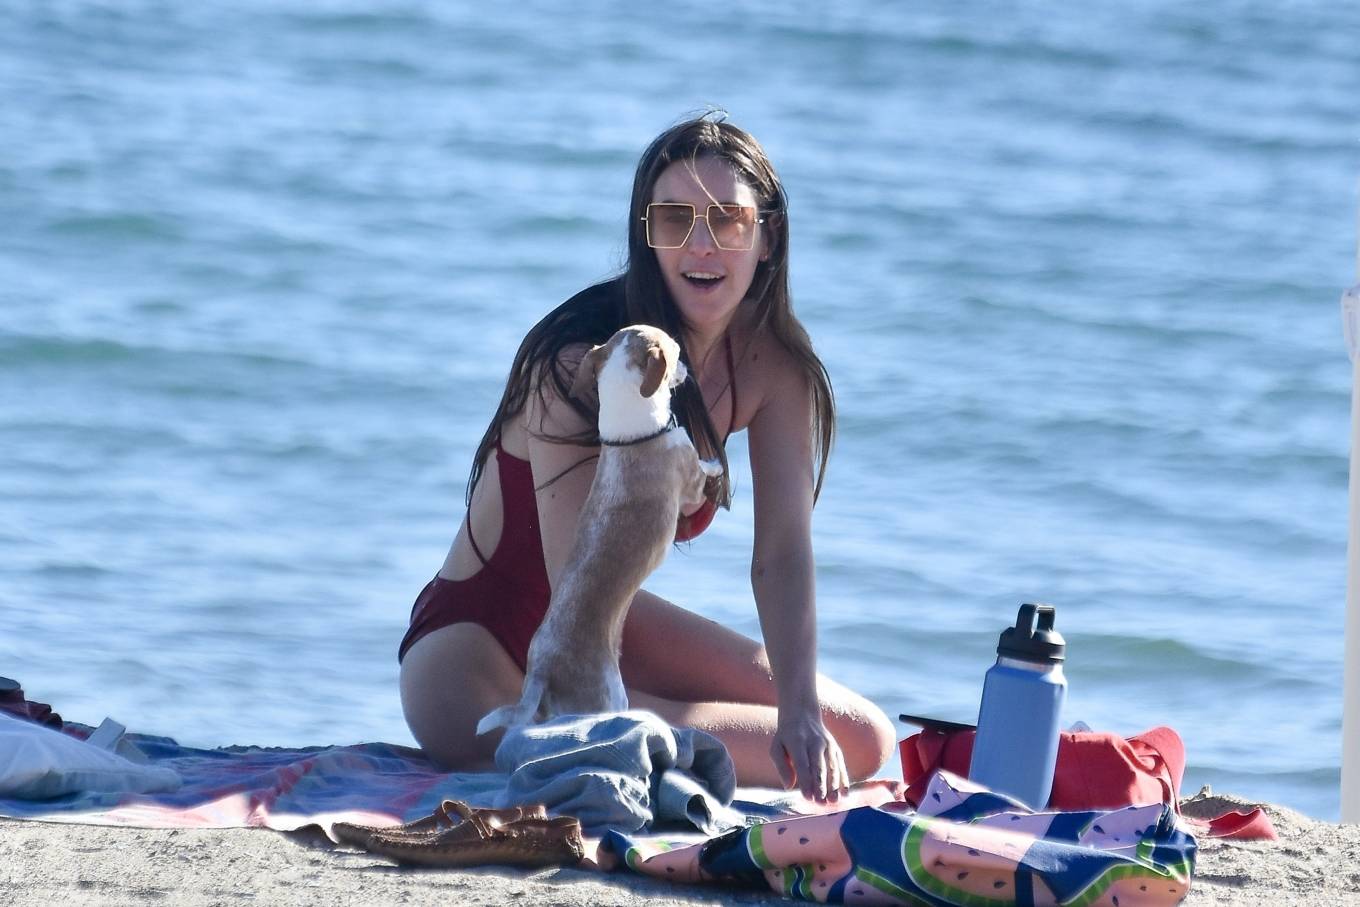 Scout Willis - Pictured in a red swimsuit at a beach in Malibu.